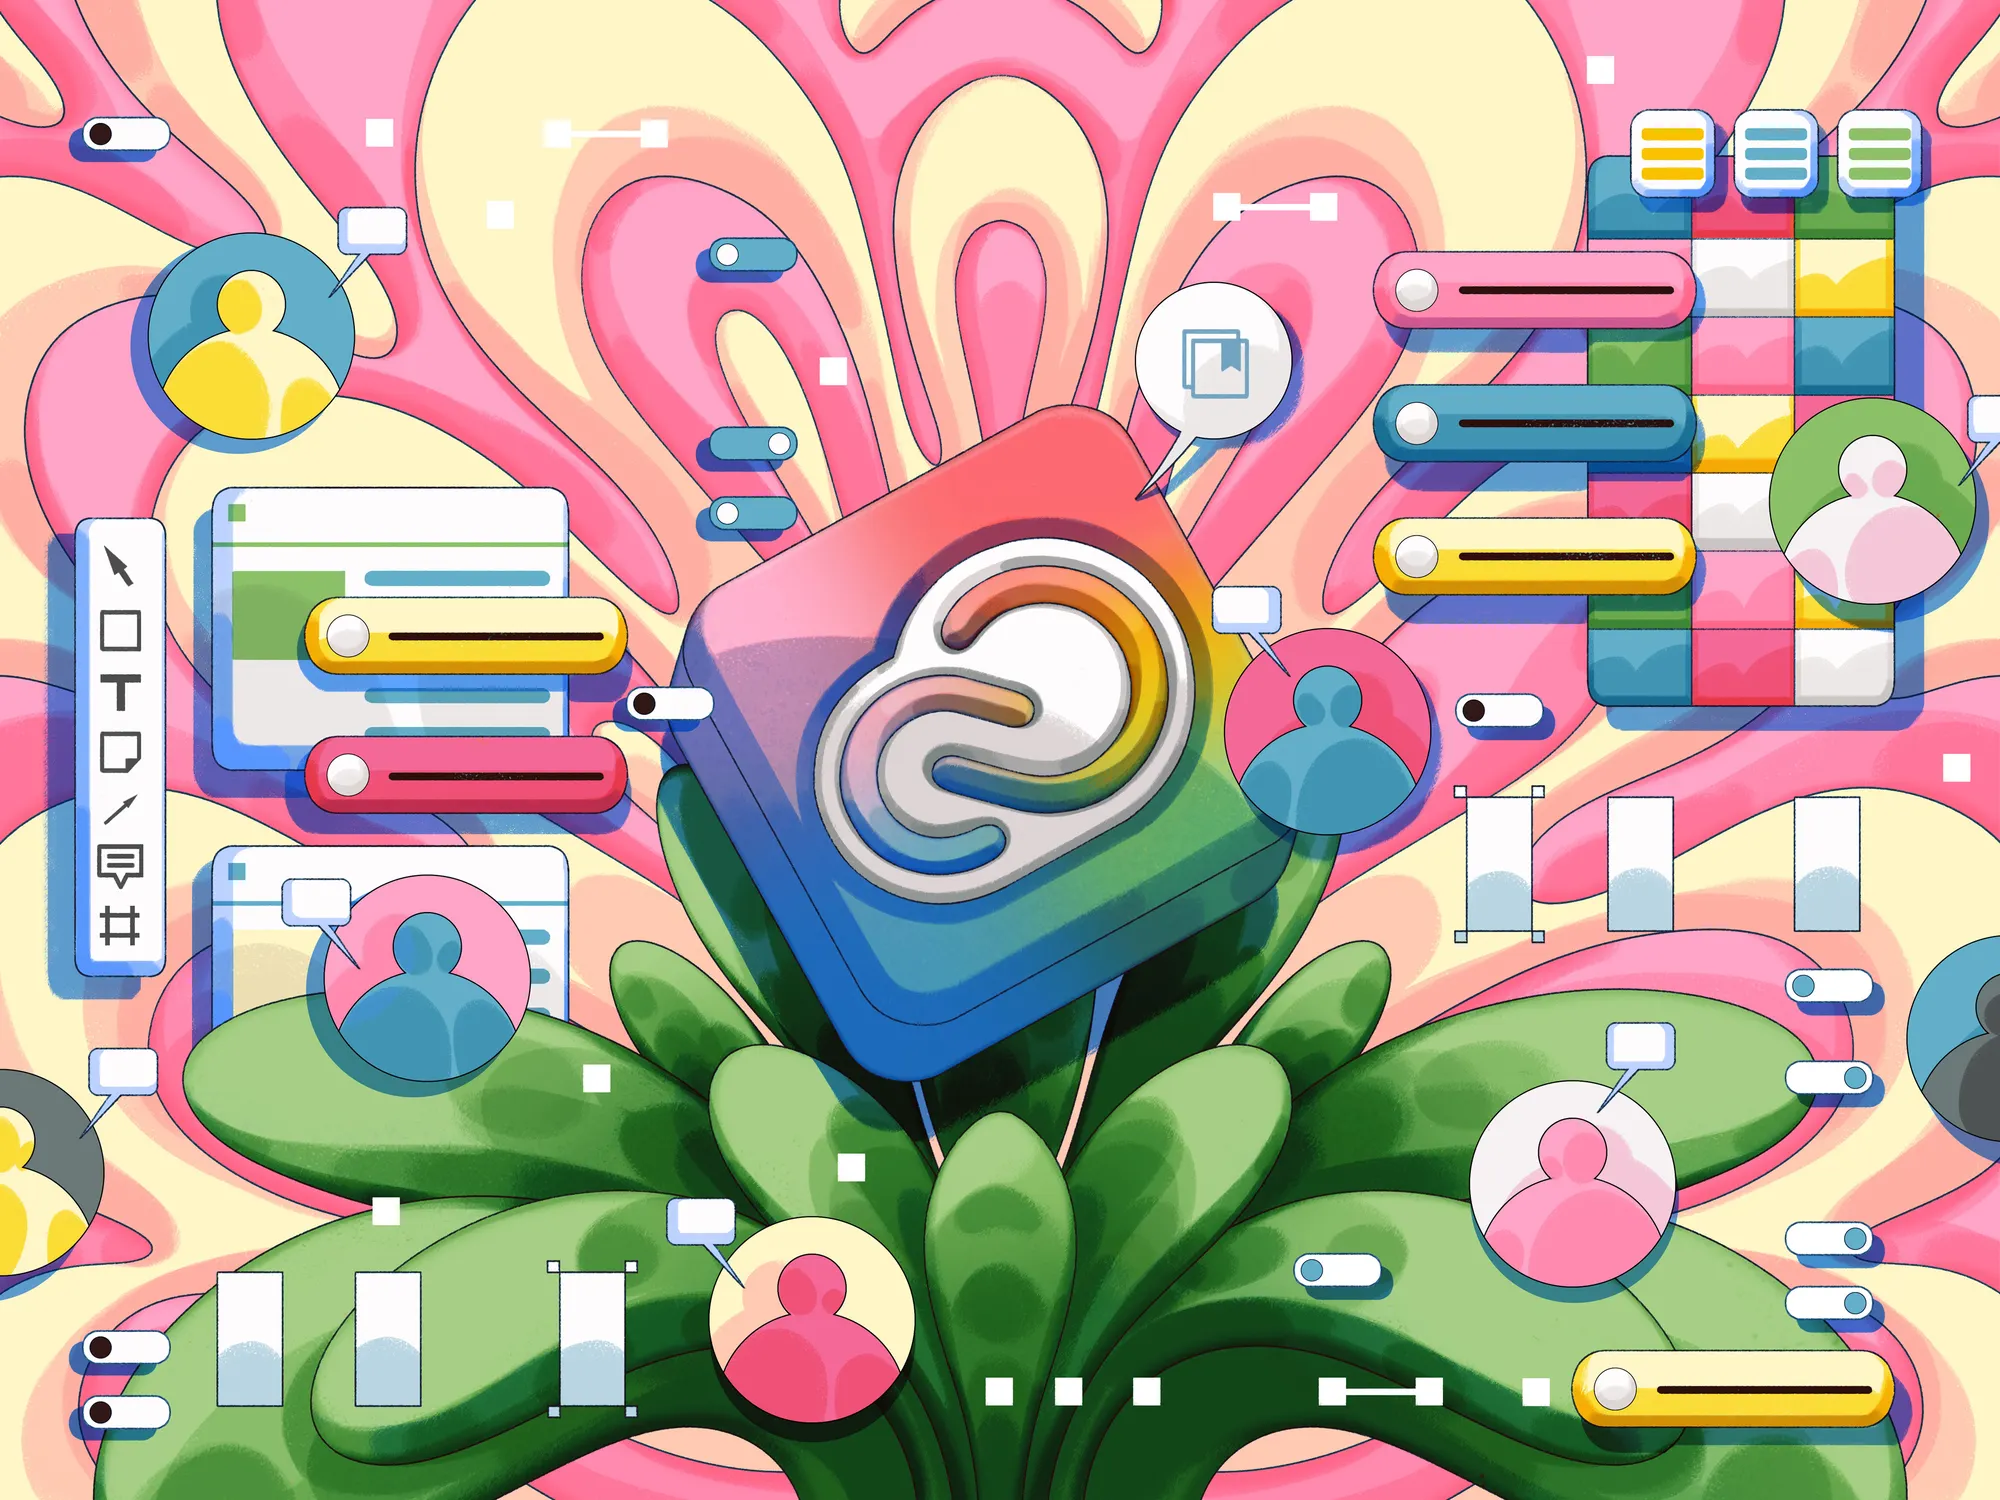 Stylized versions of application toolbars, menus, buttons, and feedback modules crowd a floral artboard with a 3D Creative Cloud icon at its center.